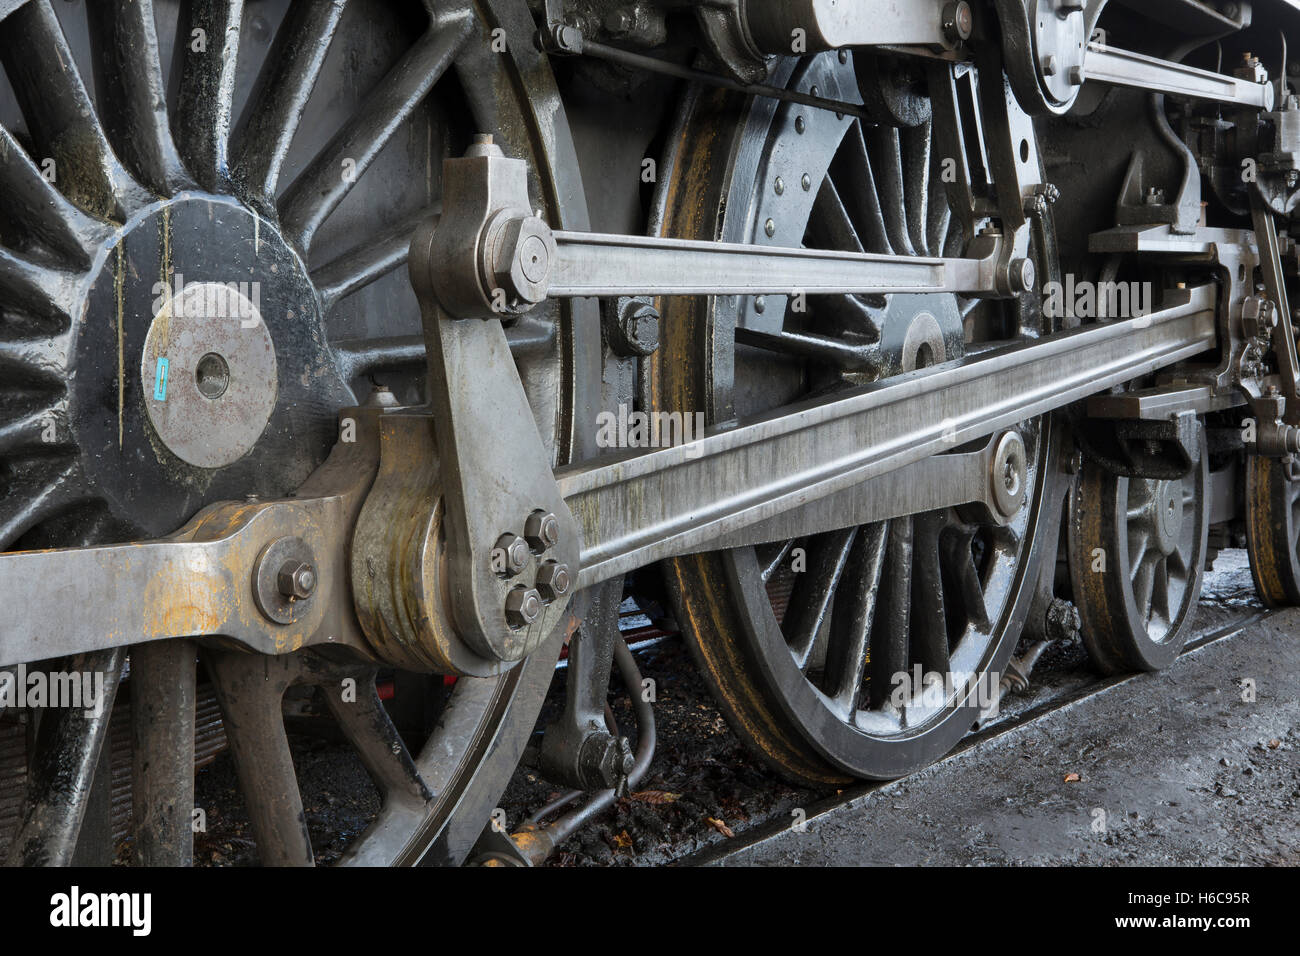 Detailed view of the running gear of a steam train. Large wheel in foreground with piston rod in full view to front wheels. Stock Photo